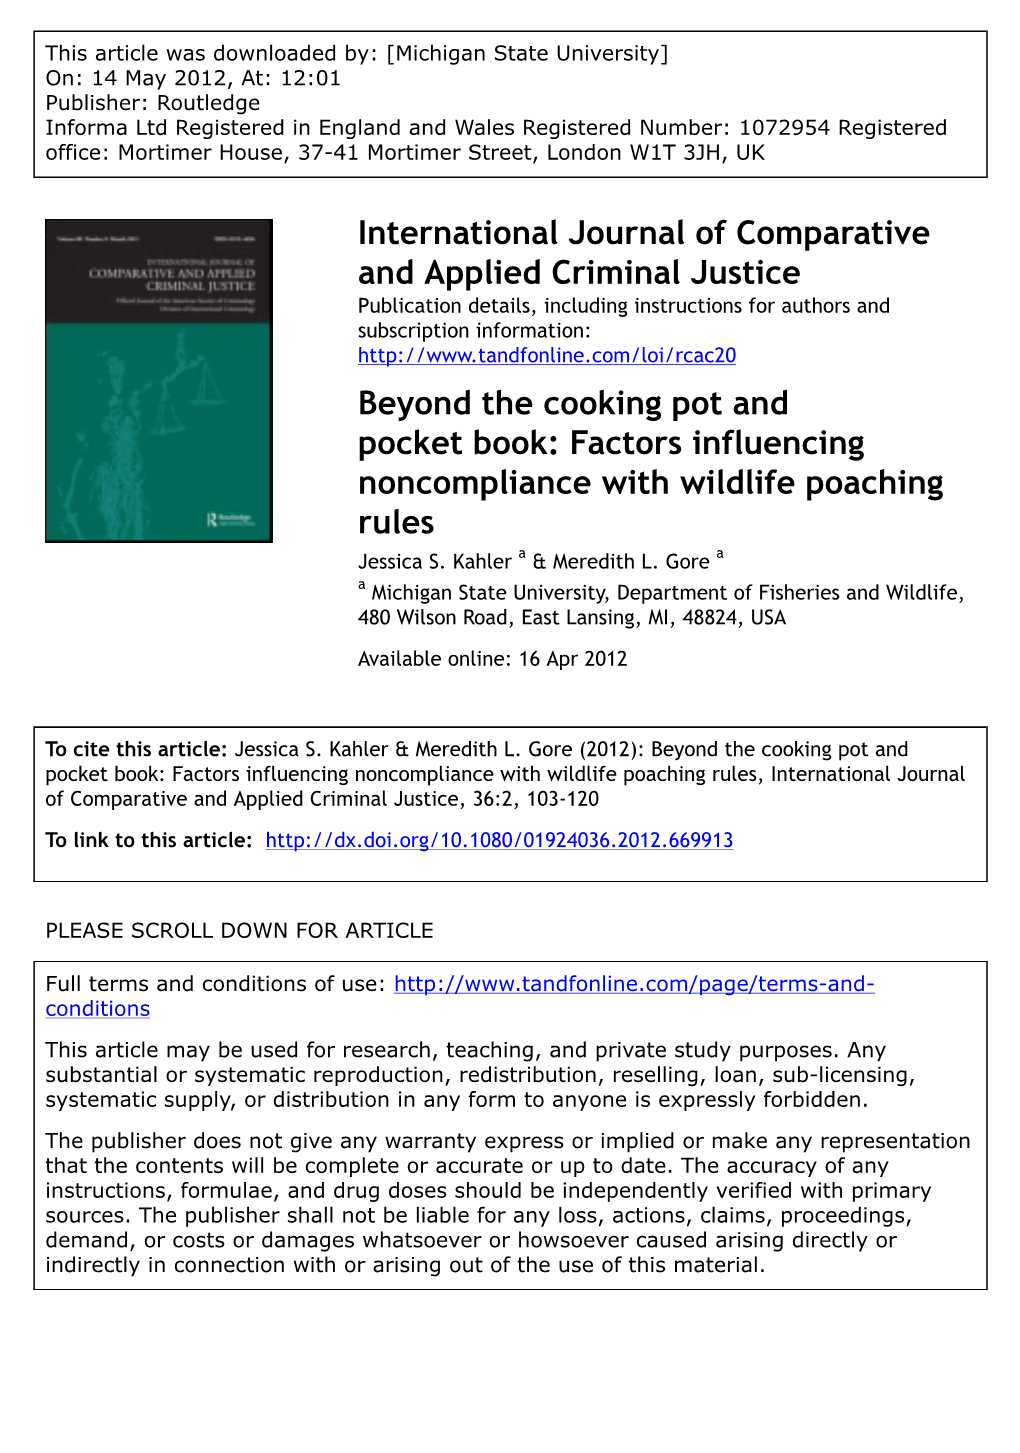 Beyond the Cooking Pot and Pocket Book: Factors Influencing Noncompliance with Wildlife Poaching Rules Jessica S